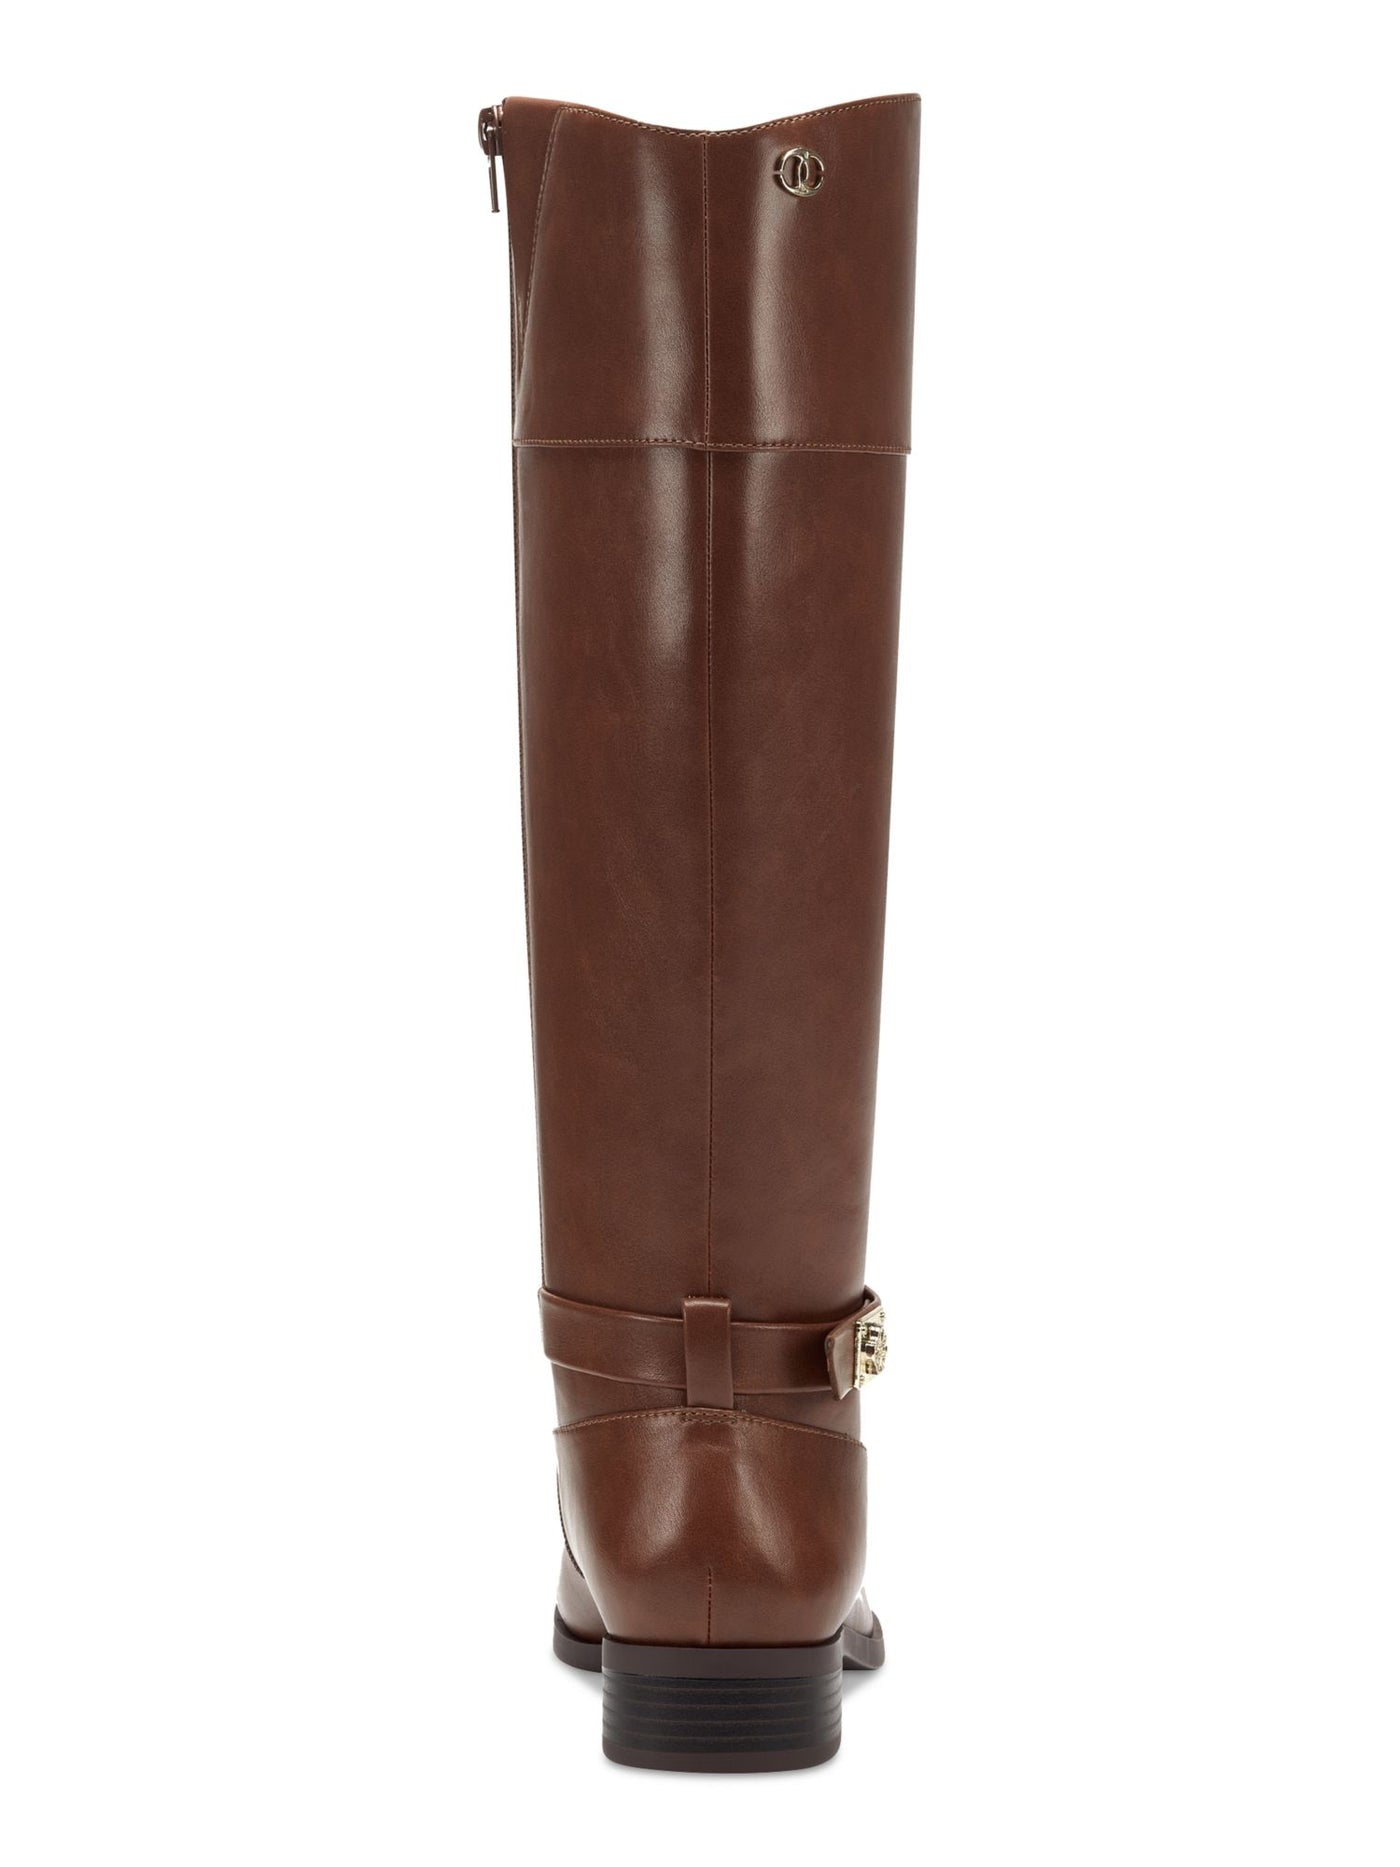 CHARTER CLUB Womens Brown Buckle Accent Johannes Round Toe Zip-Up Riding Boot 9.5 M